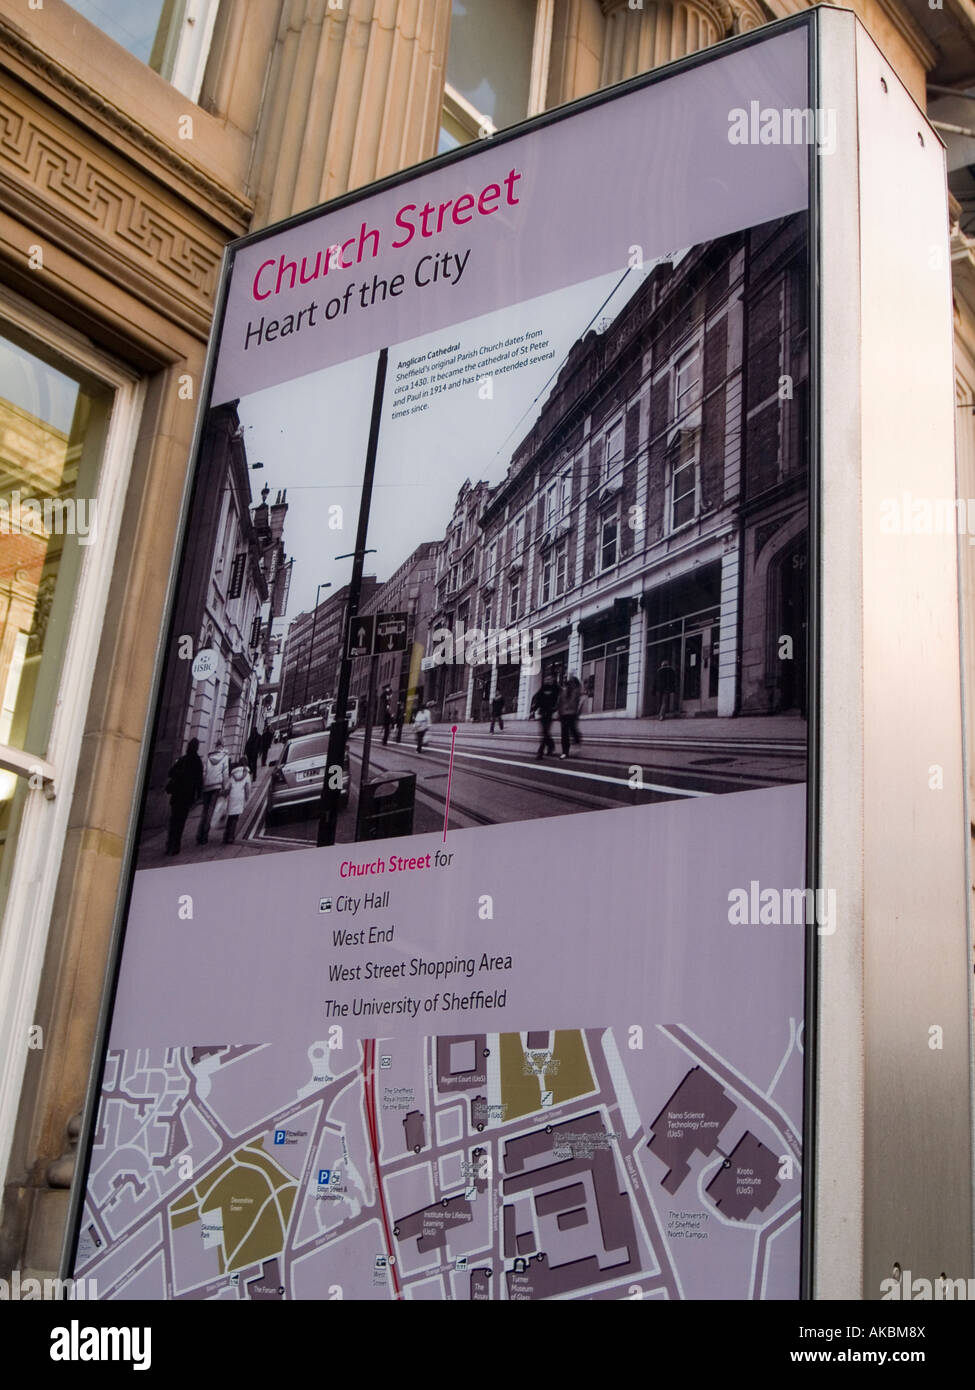 An information panel with a map and history of the Church Street area of Sheffield City Centre, UK Stock Photo